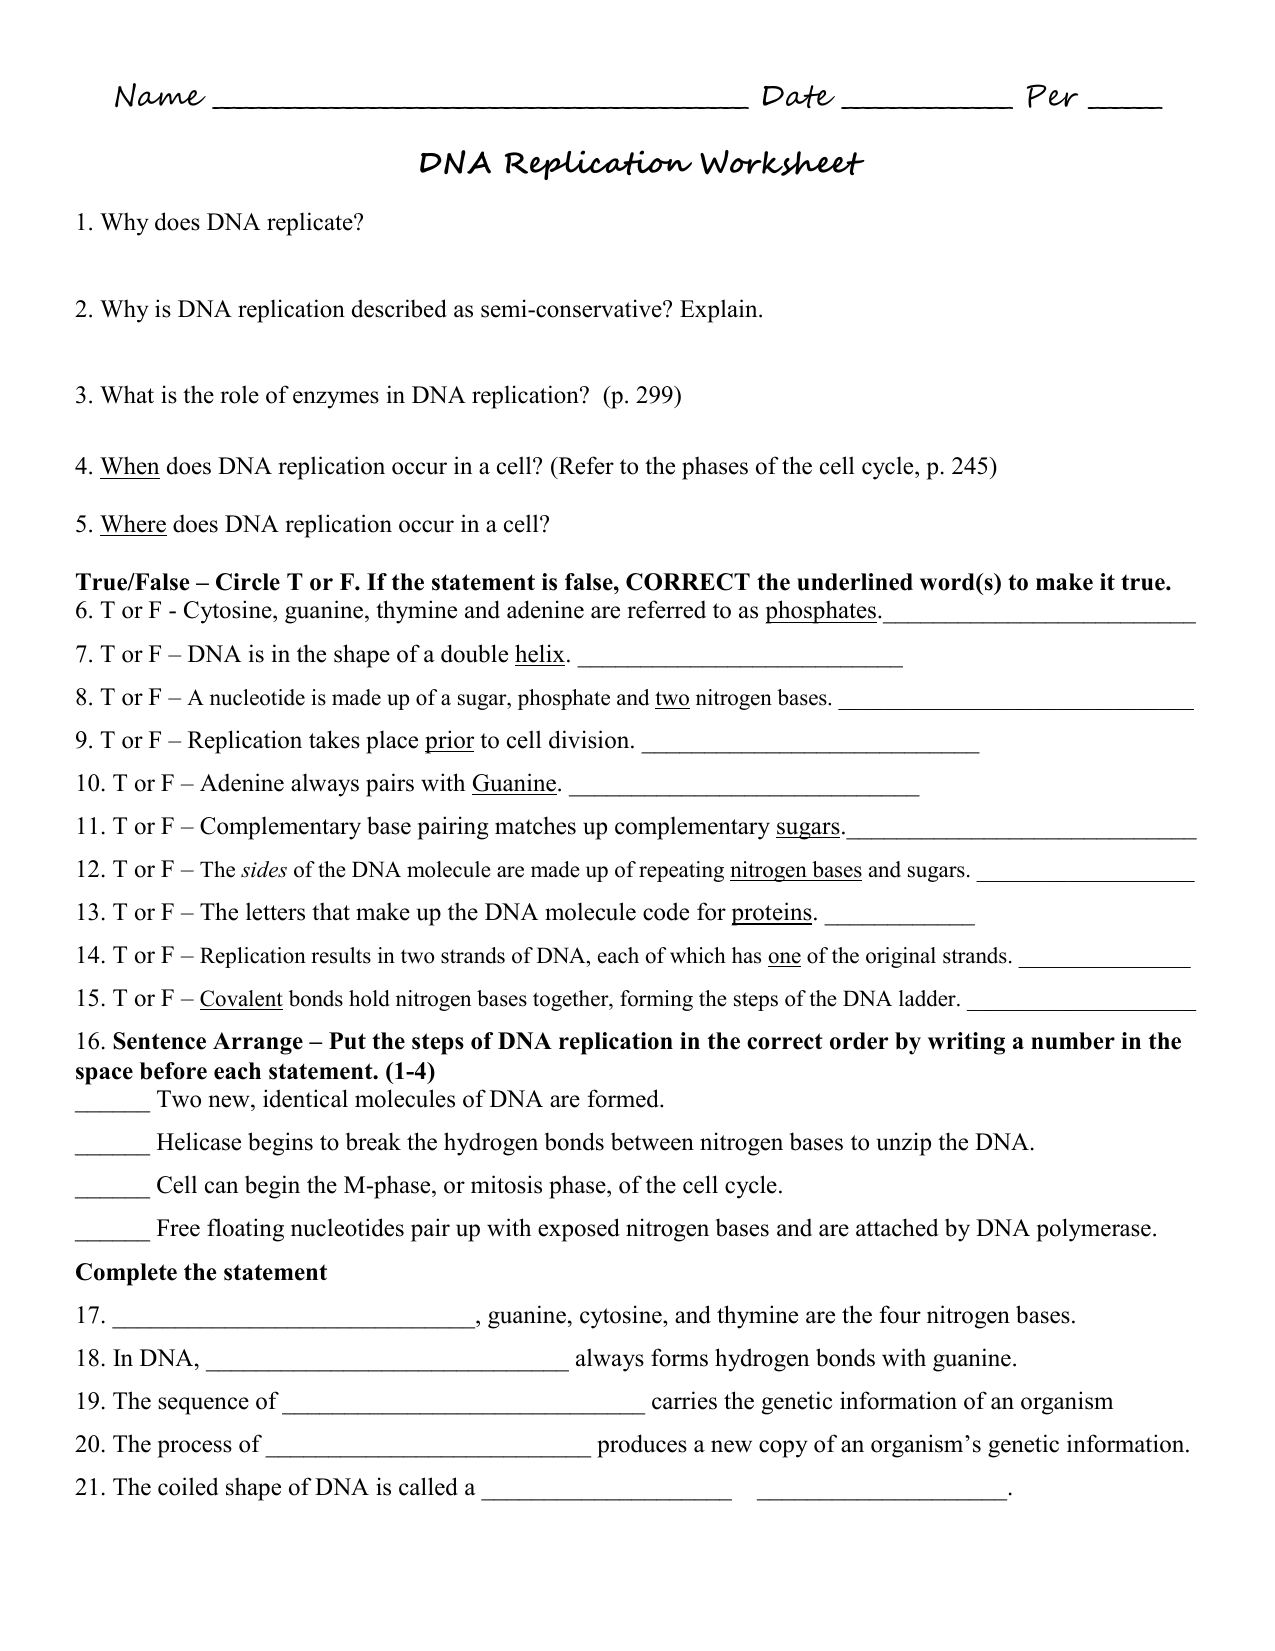 DNA Replication Worksheet Pertaining To Dna Replication Worksheet Answer Key